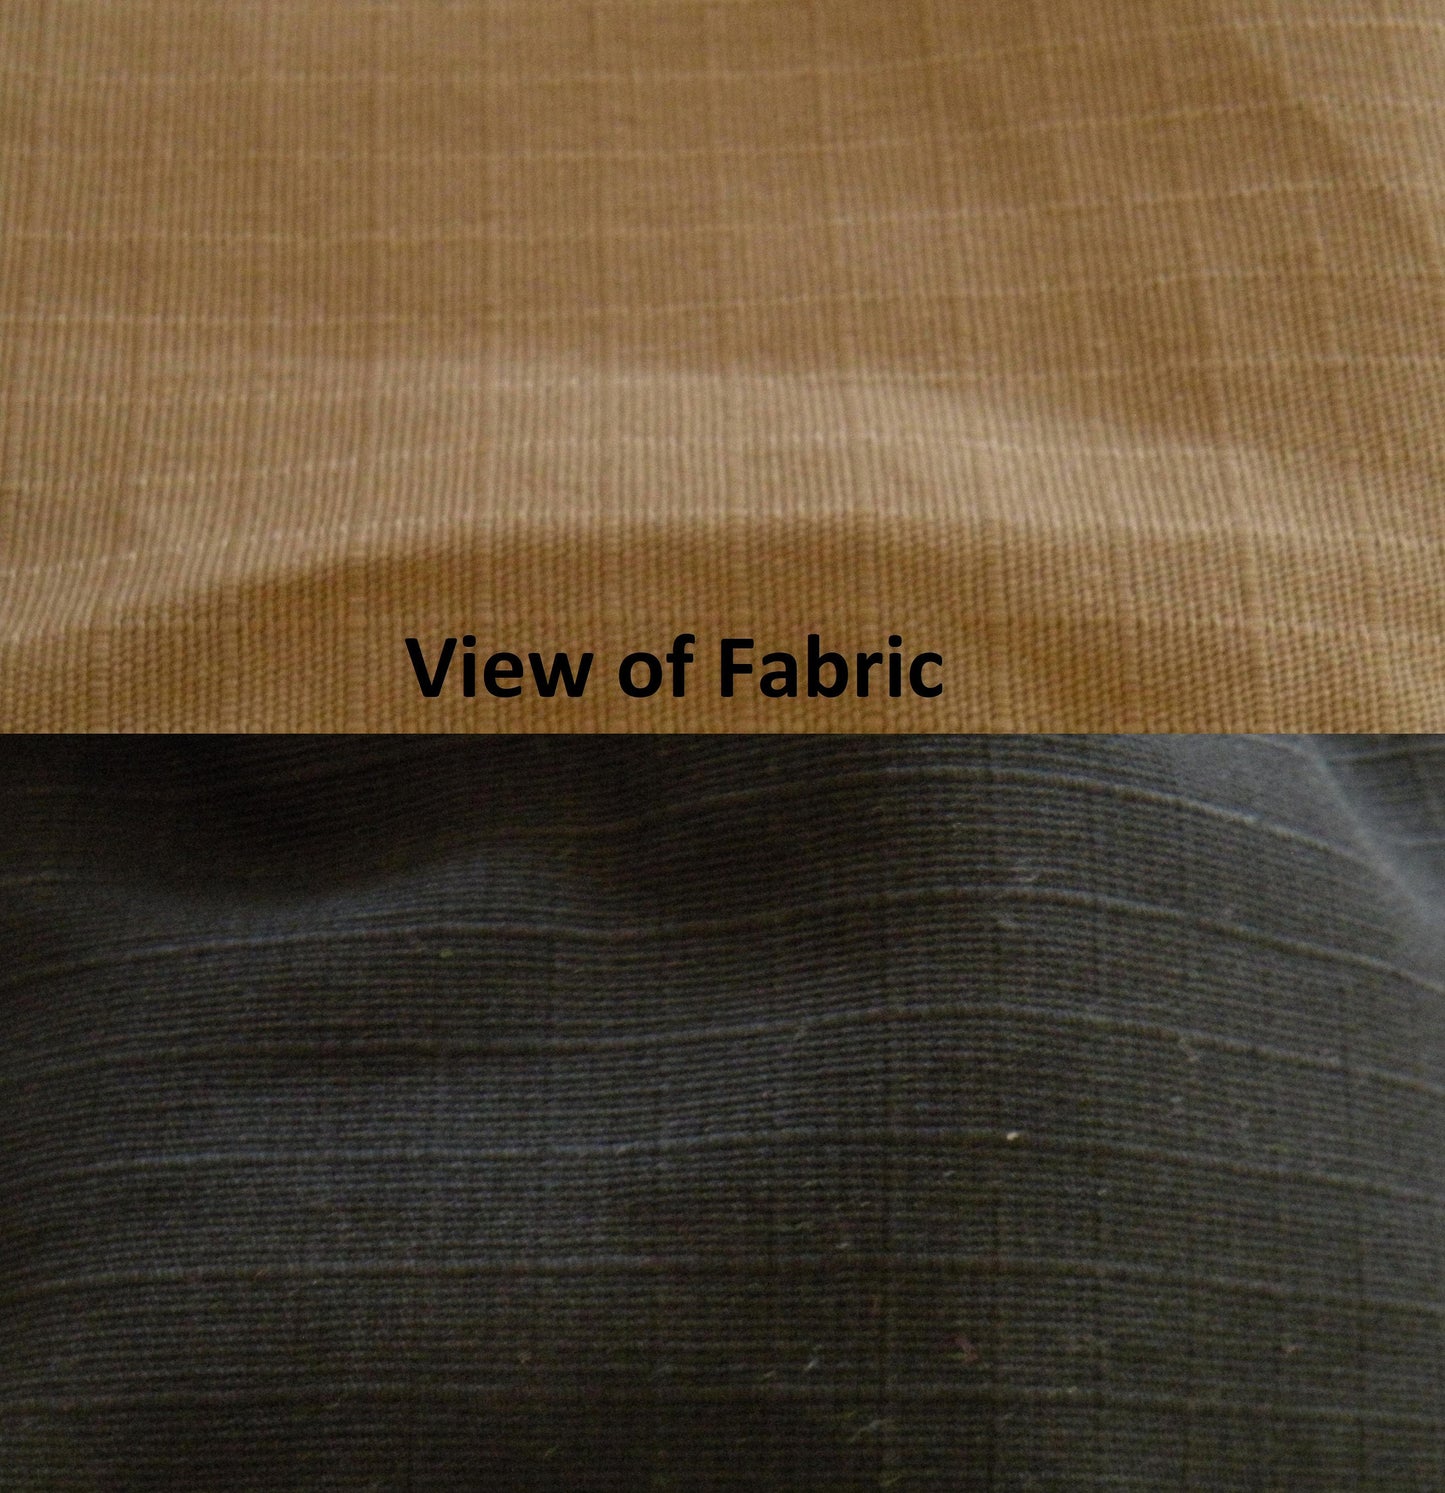 view of the tan and black 100% cotton ripstop fabric